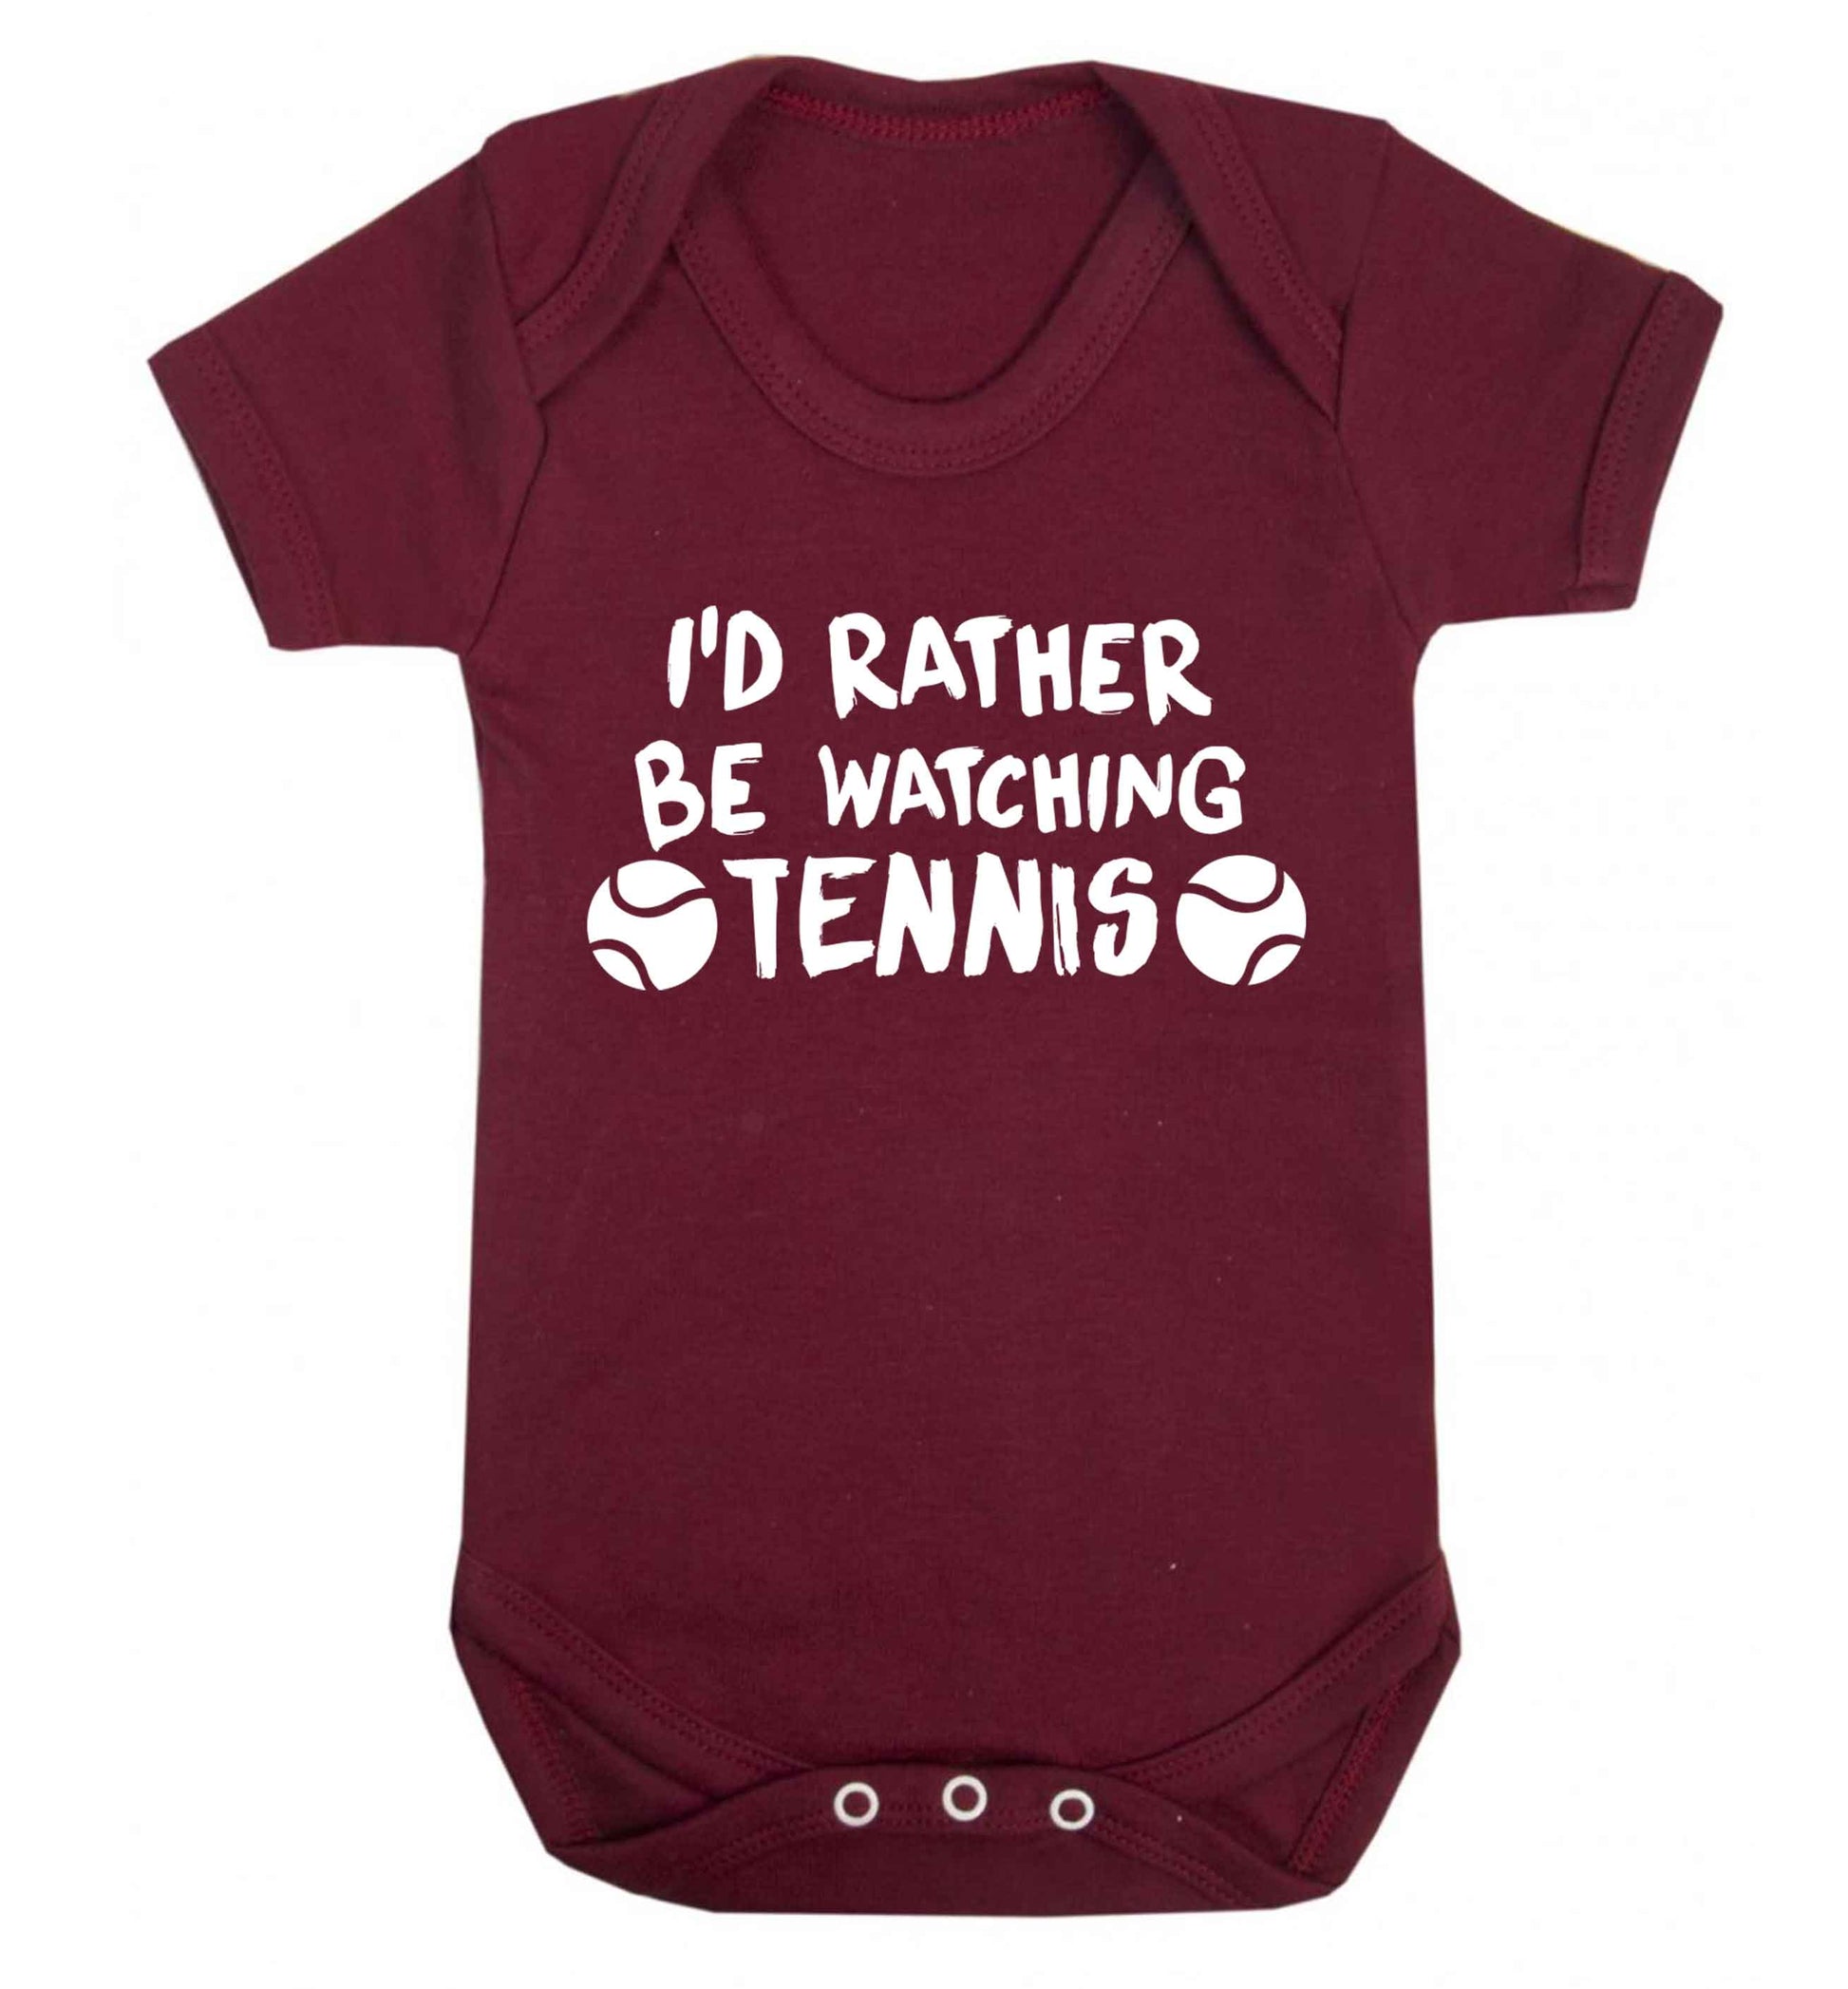 I'd rather be watching the tennis Baby Vest maroon 18-24 months